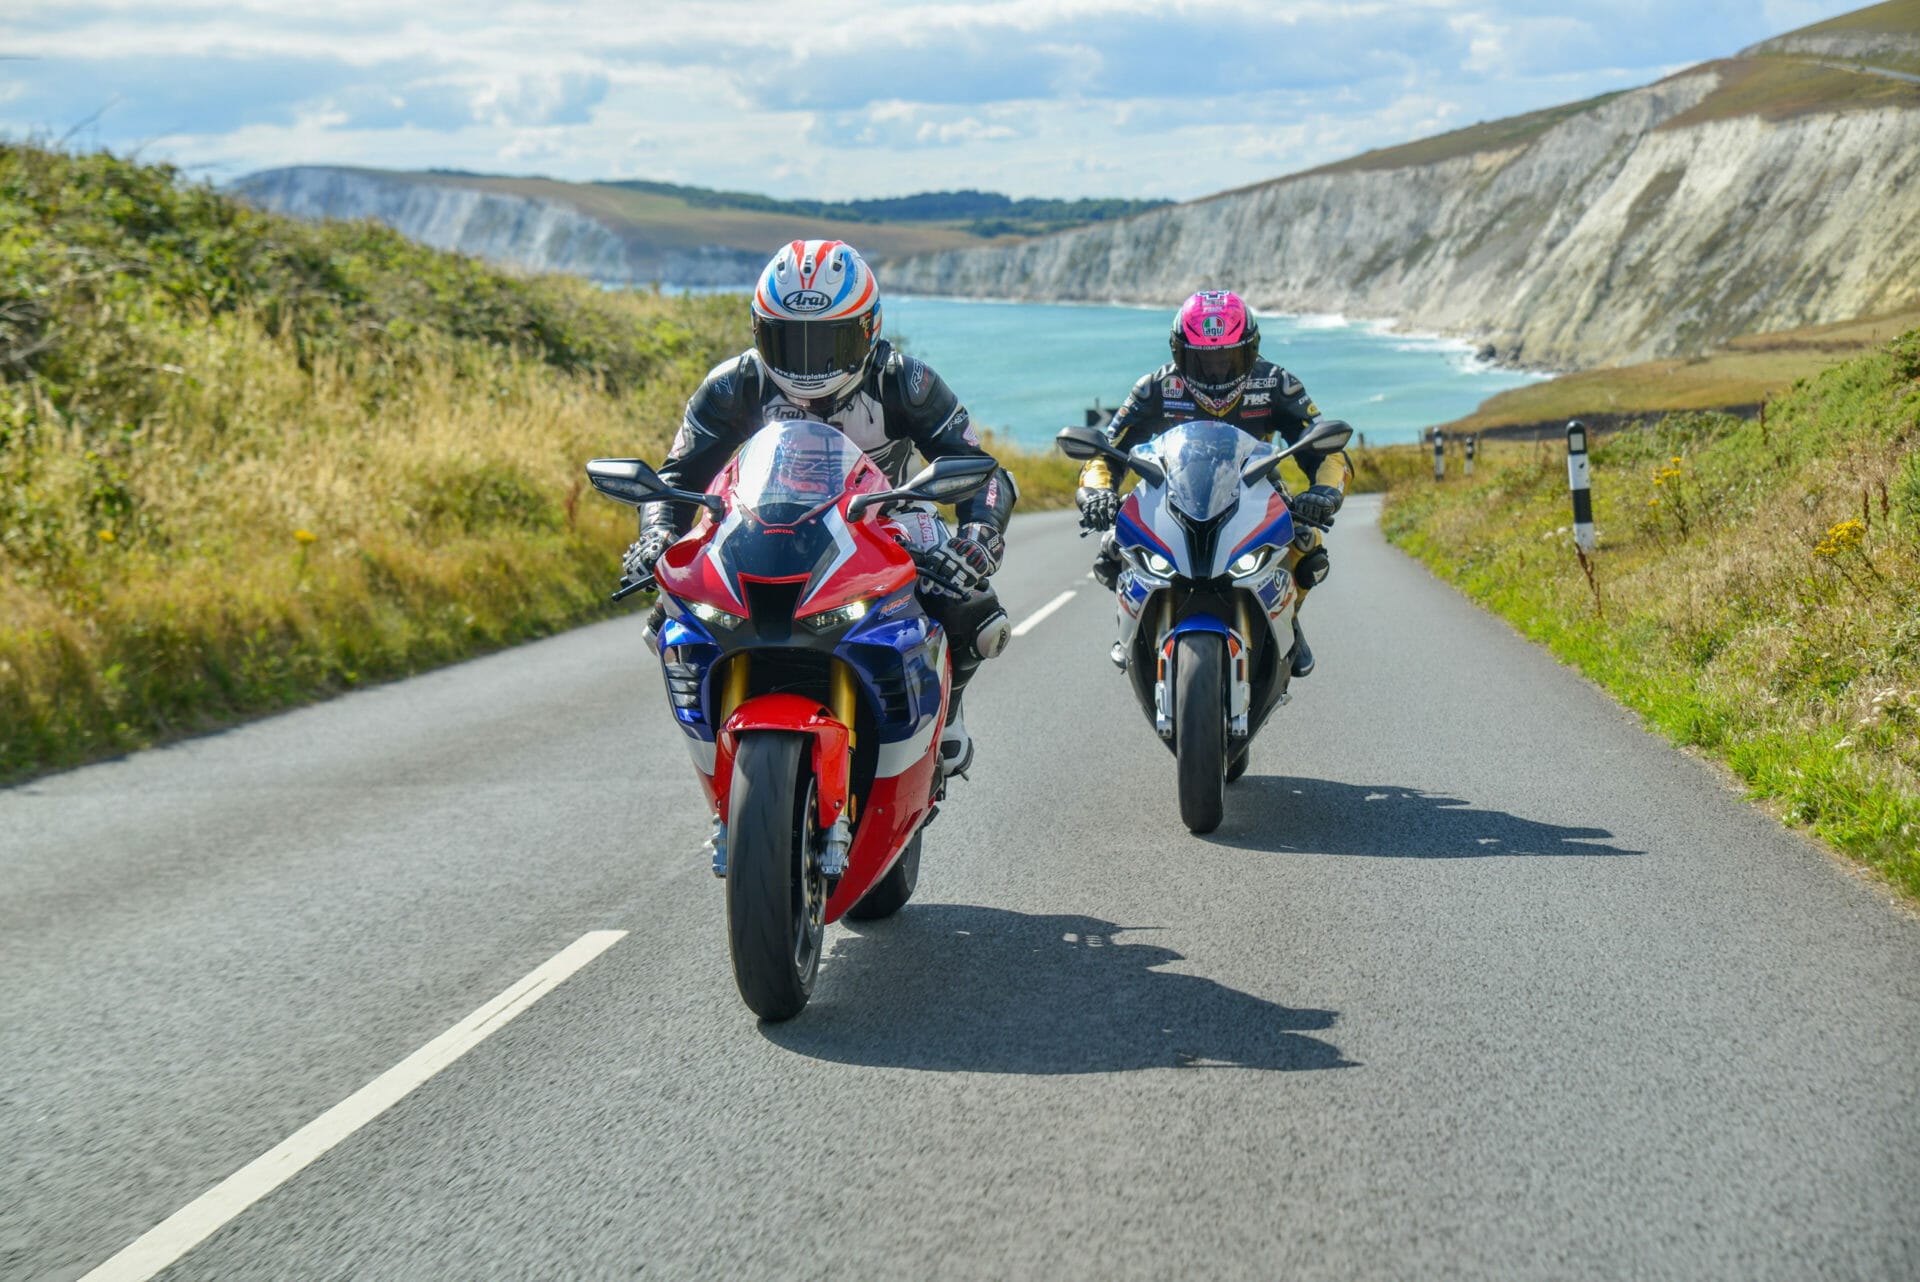 Road racing to take place on the Isle of Wight
- also in the MOTORCYCLES.NEWS APP